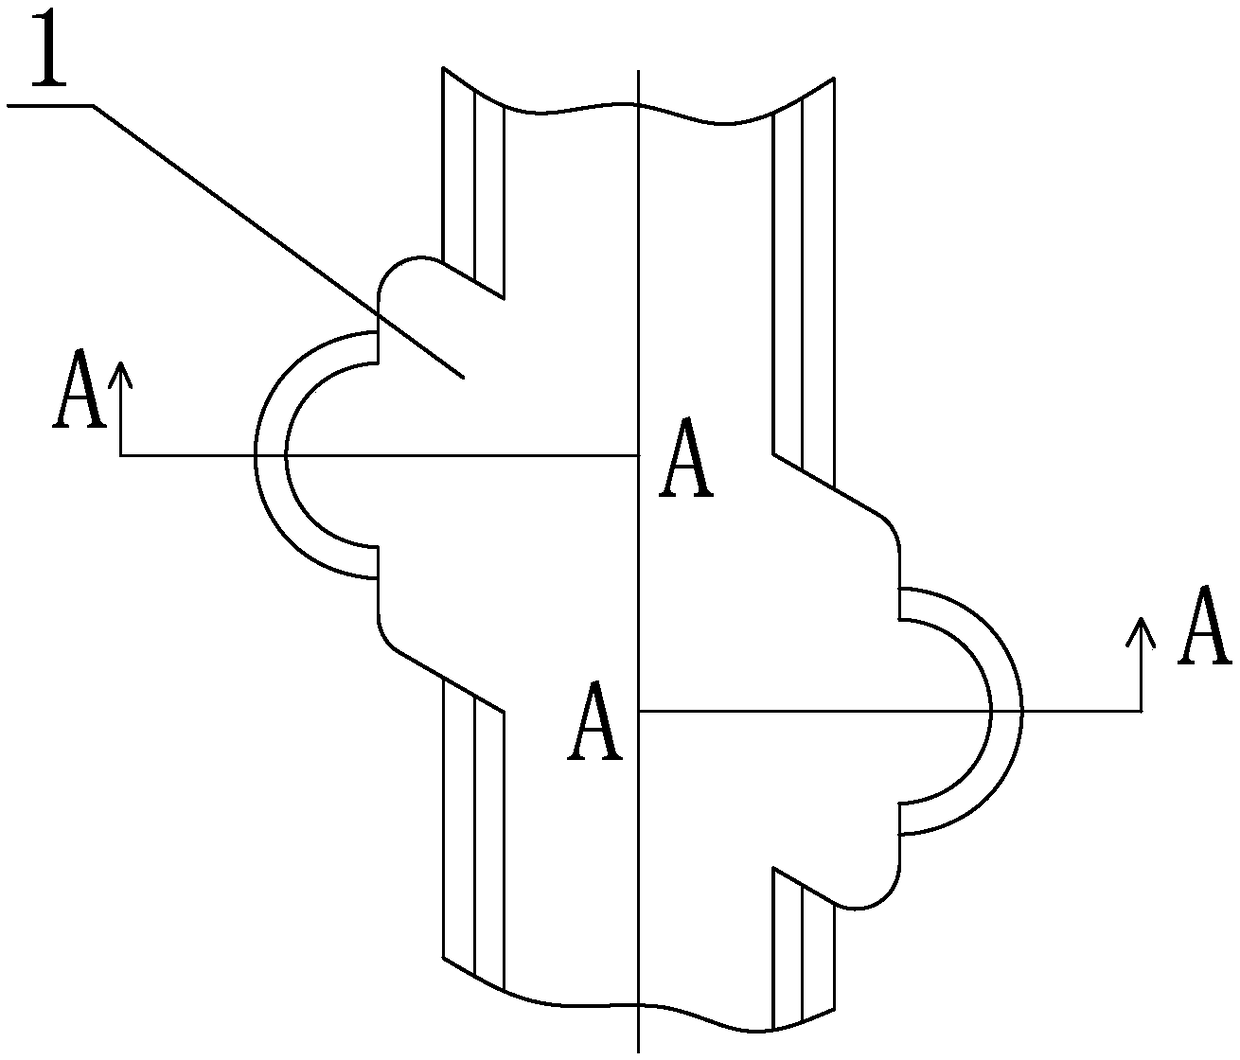 A method for processing the lock opening of the last rotor blade with threads